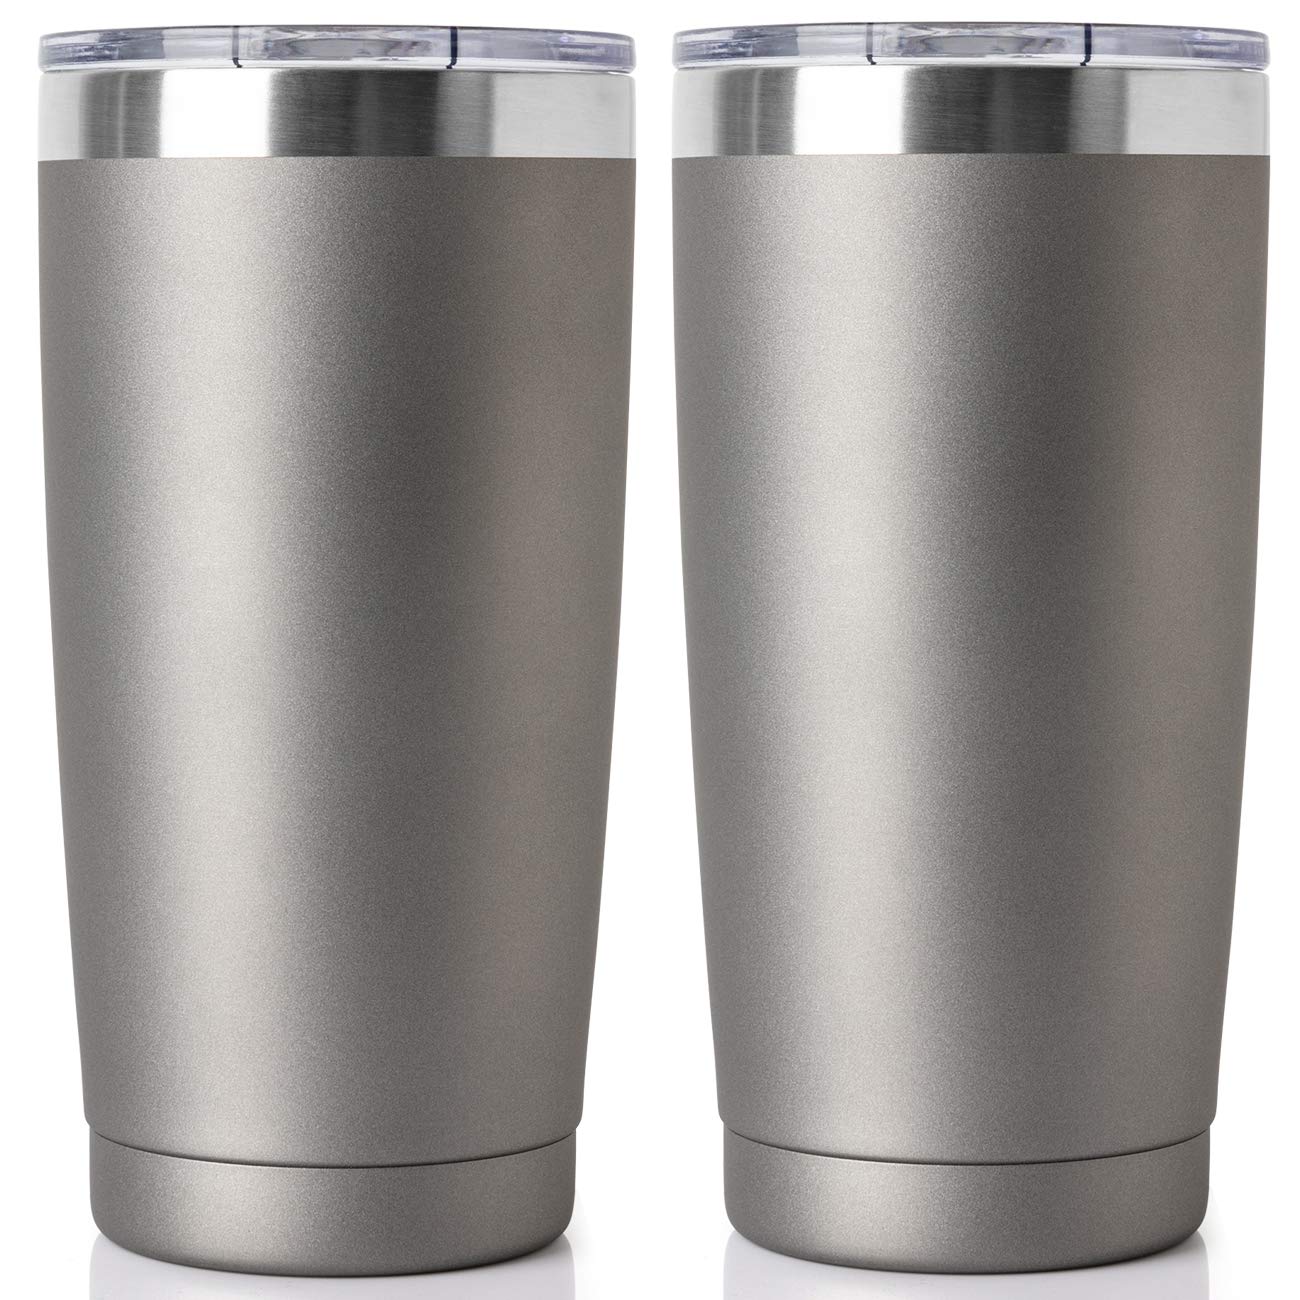 20oz Tumbler Double Wall Vacuum Insulated Coffee Mug Stainless Steel Coffee Cup with Lid, Travel Mug Works Great for Ice Drink, Hot Beverage (2 pack, Cold gray)